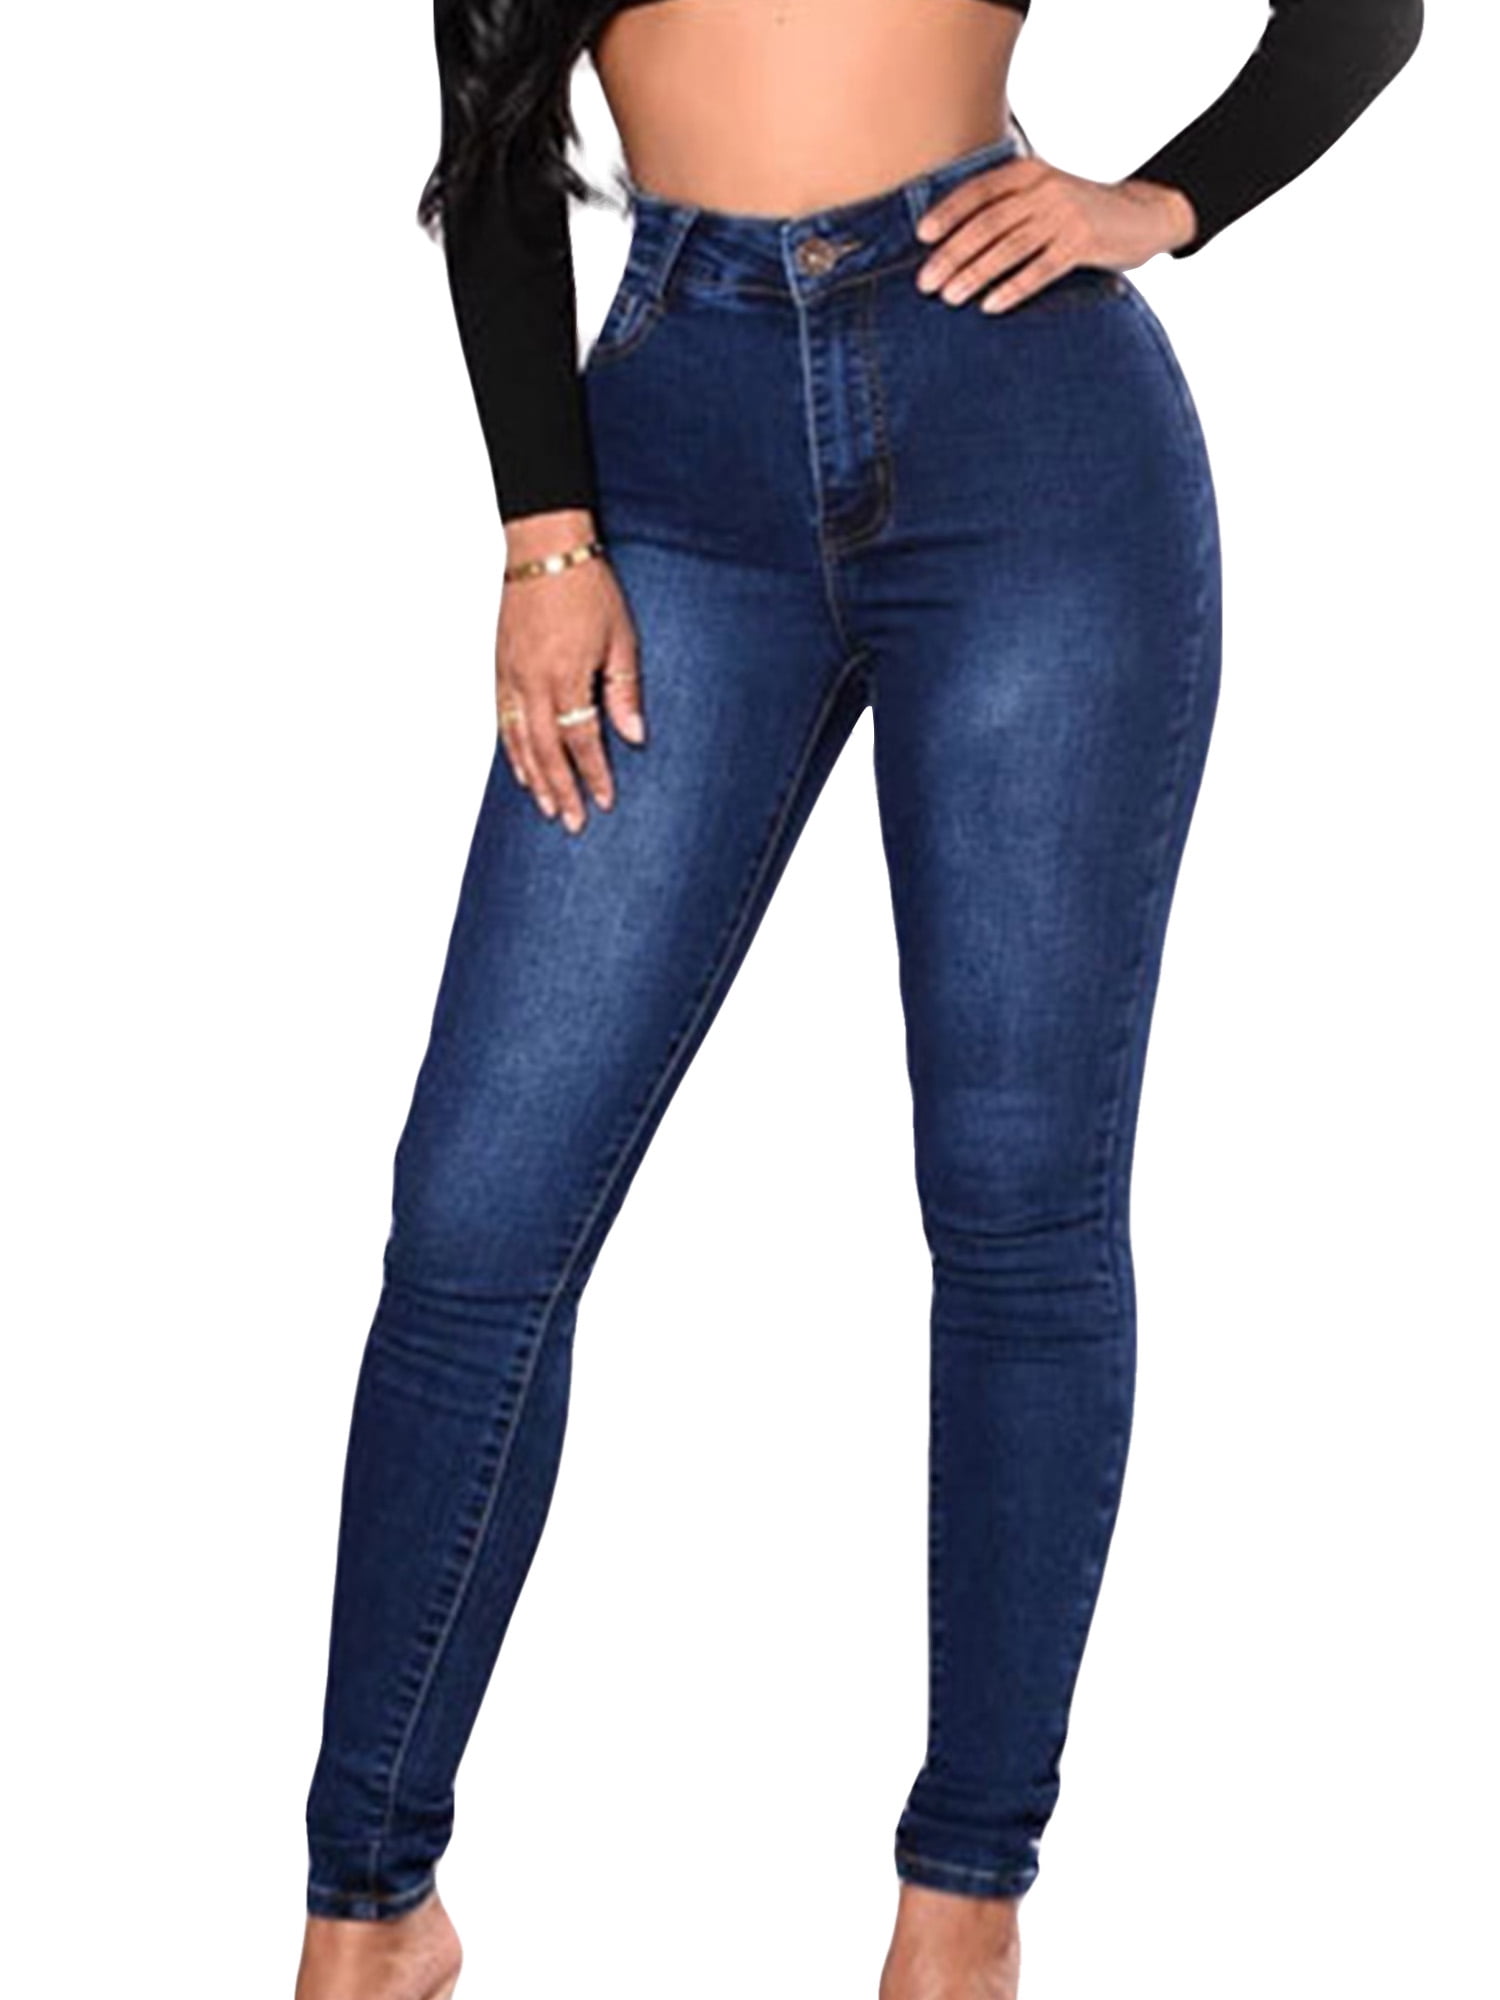 Womens High Waisted Jeans Pants Skinny Ladies Jeggings Trousers Casual Stretchy